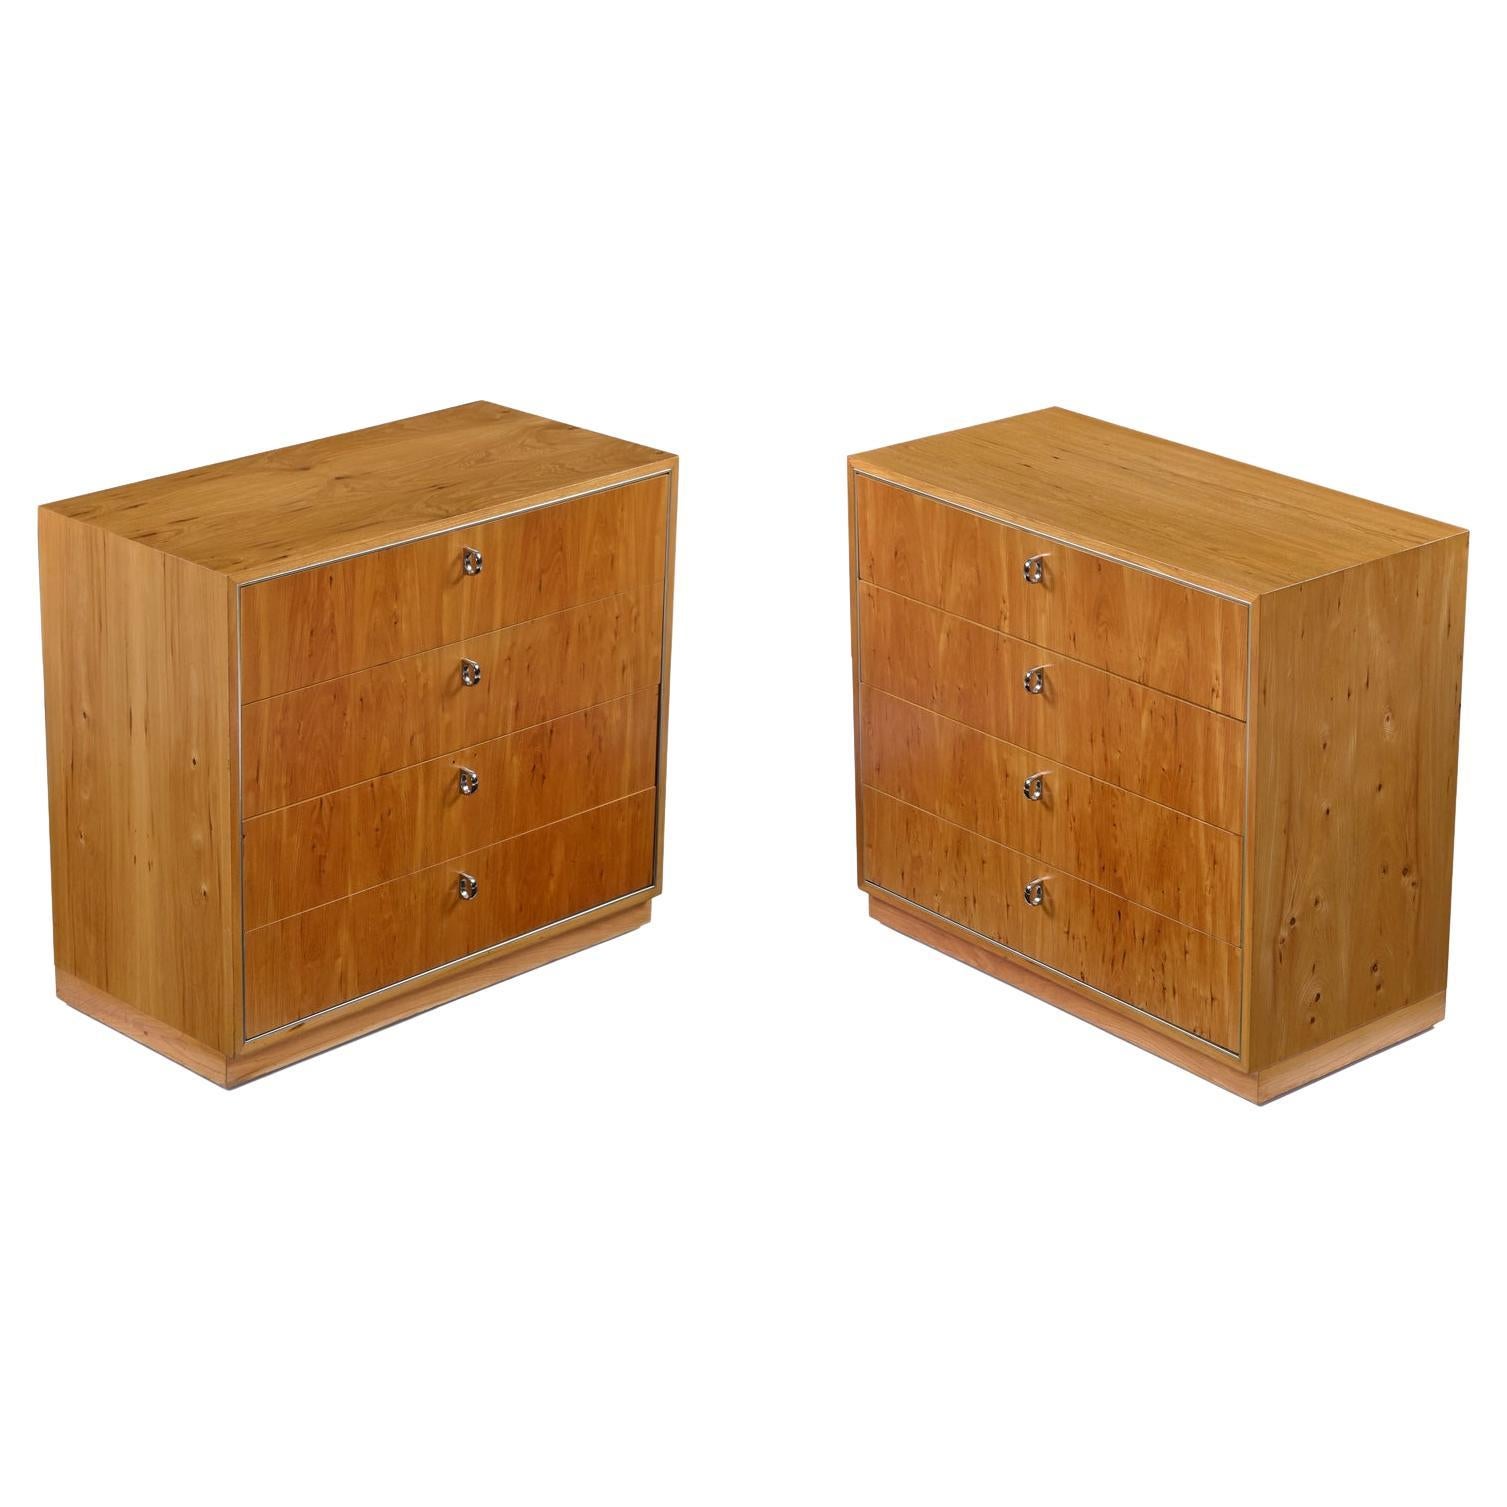 Masterfully crafted and preserved vintage 1970s bachelors chests by John Stuart Inc..  We were lucky enough to purchase these pieces from a time capsule estate outfitted with premium furnishings. These hickory wood cabinets have been delicately